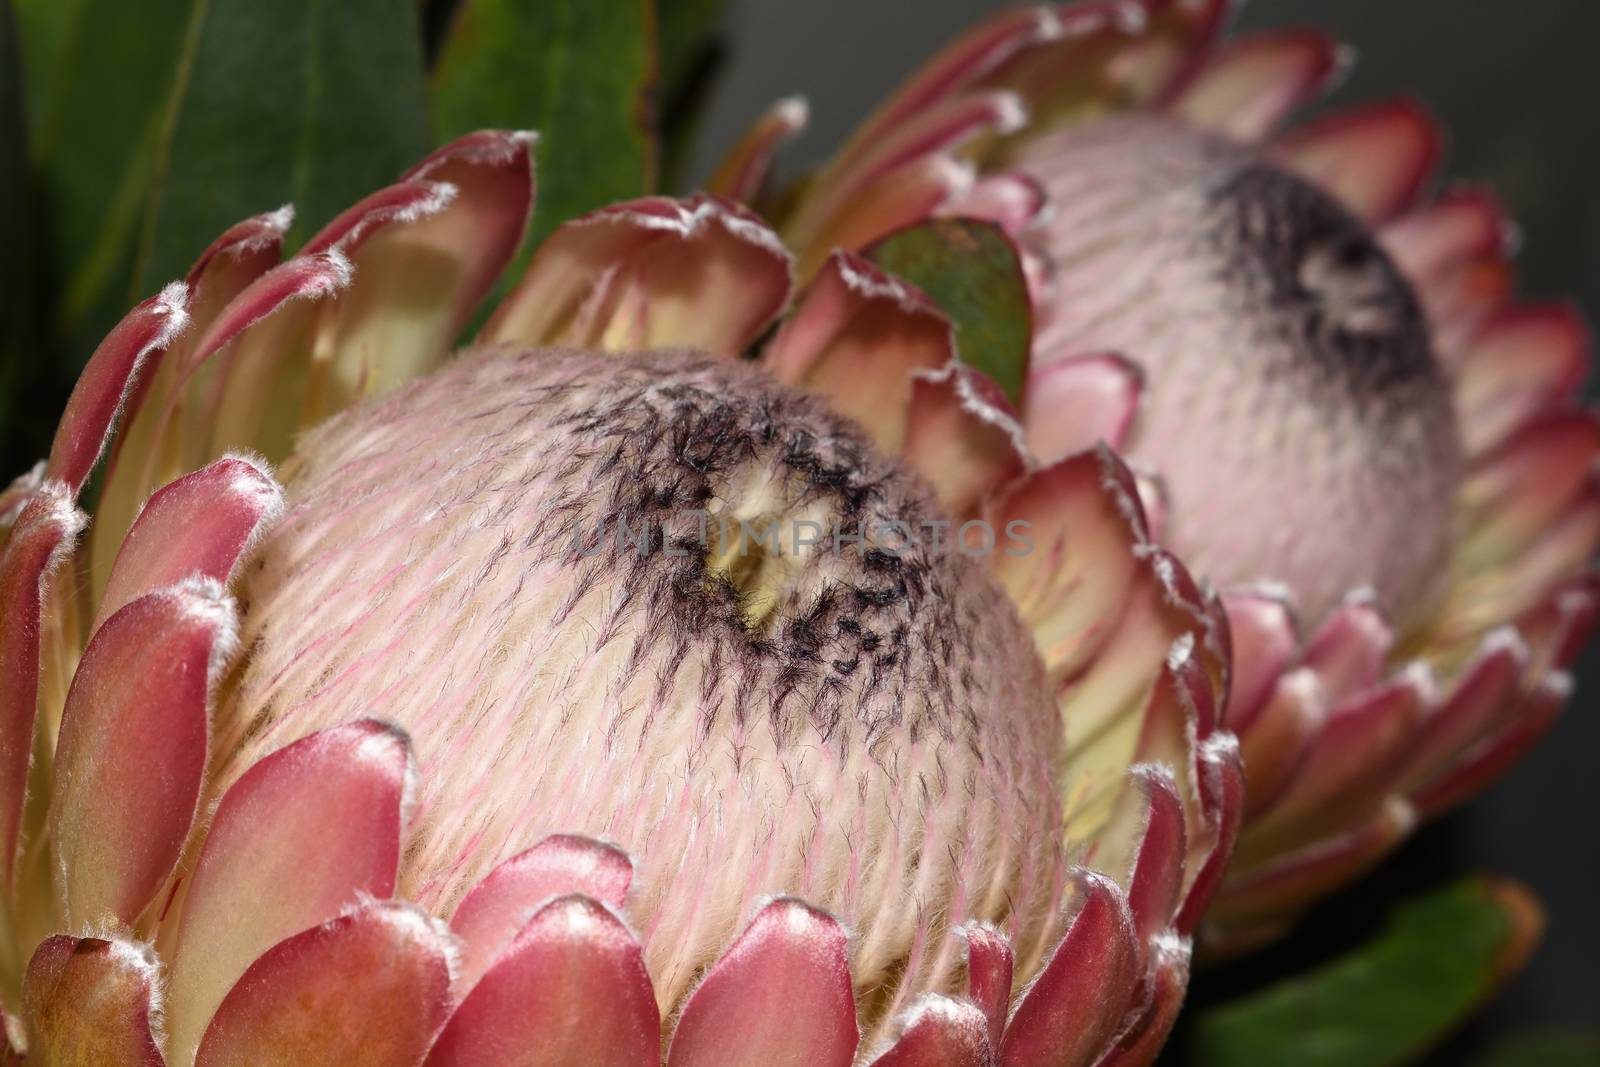 A pair of full bloom susara protea flowers (Protea susara) close-up, Mossel Bay, South Africa